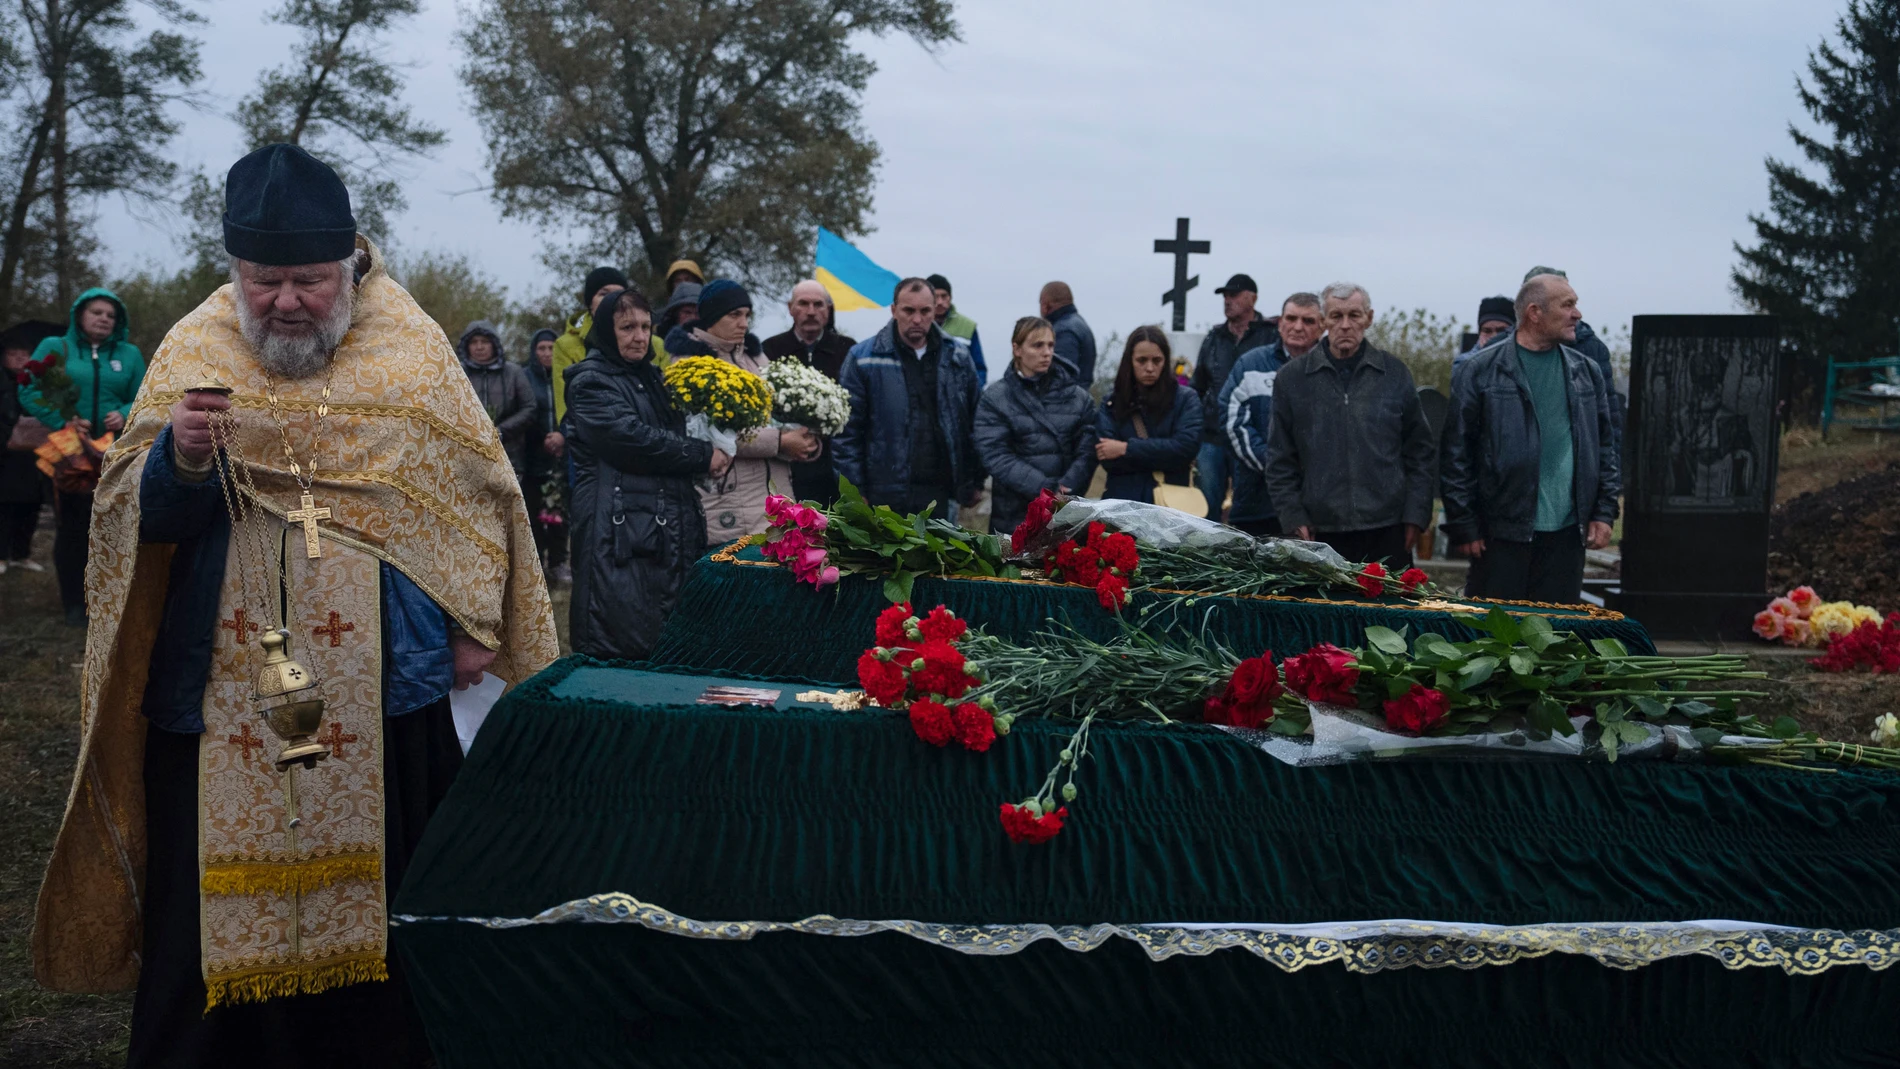 A priest conducts a service by the coffins of Tetiana Androsovych, 60, and Mykola Androsovych, 63, killed by a rocket strike, at a graveyard in the village of Hroza, near Kharkiv, Ukraine, Saturday, Oct. 7, 2023. The Ukrainian village of Hroza has been plunged into mourning by a Russian rocket strike on a village store and cafe that killed more than 50 people on Thursday, Oct. 5. (AP Photo/Alex Babenko)